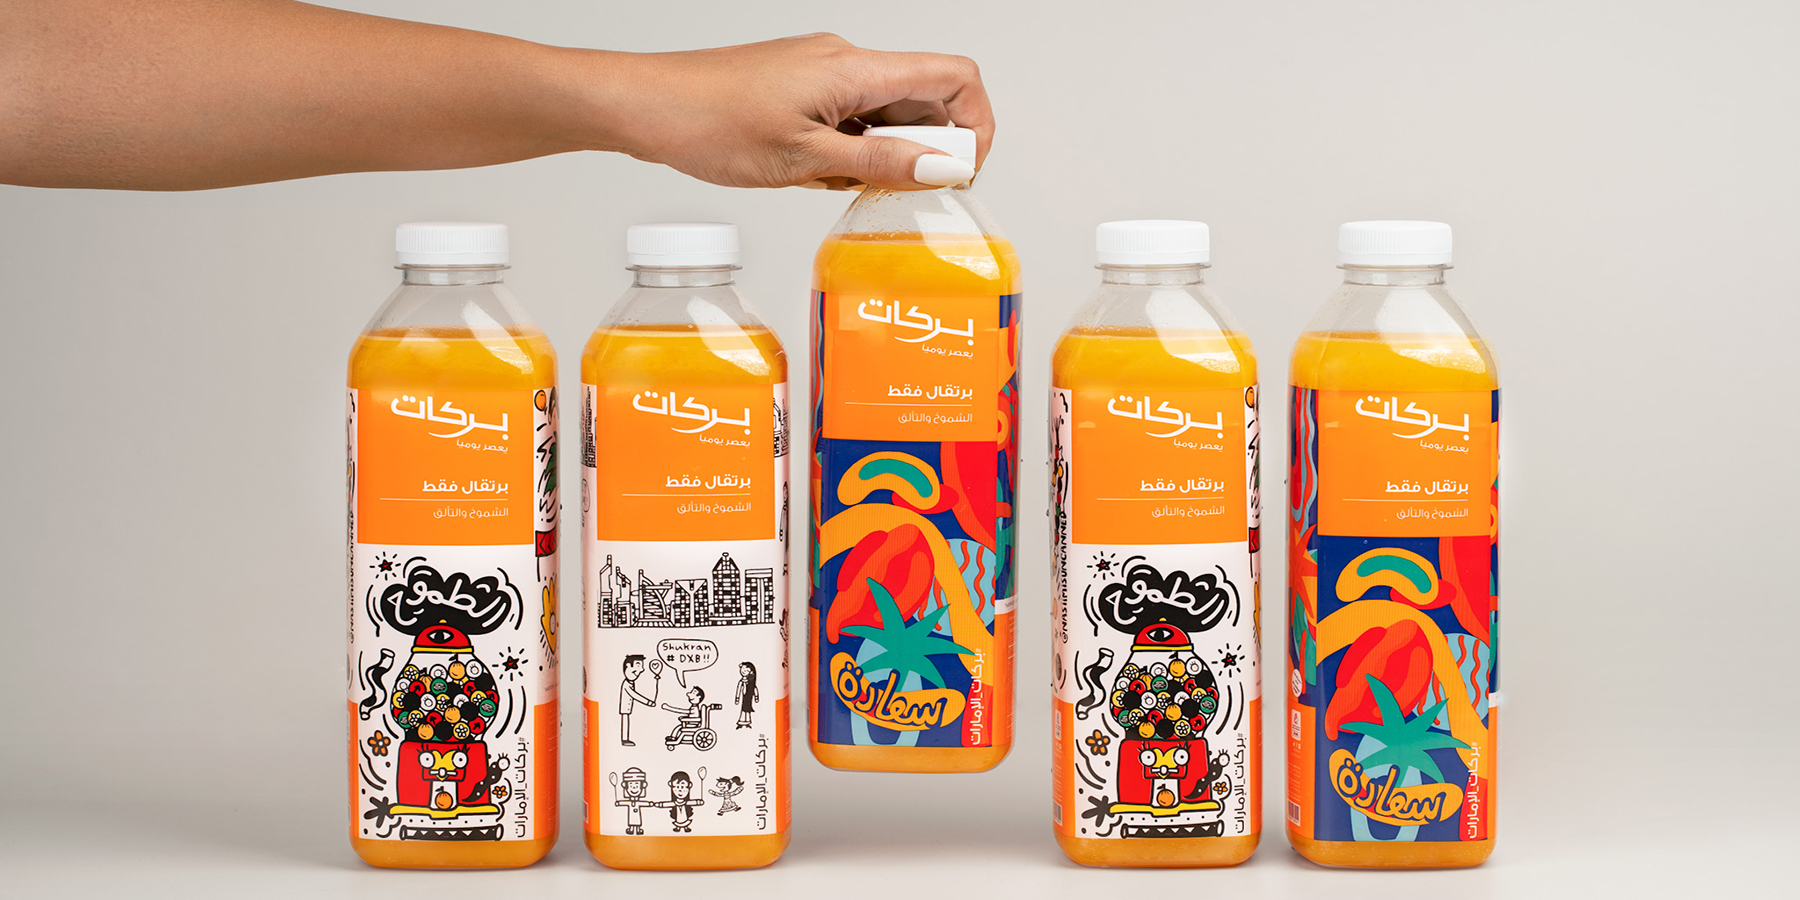 Barakat celebrates the UAE with a Limited-Edition Bottle Designed by Local Artists